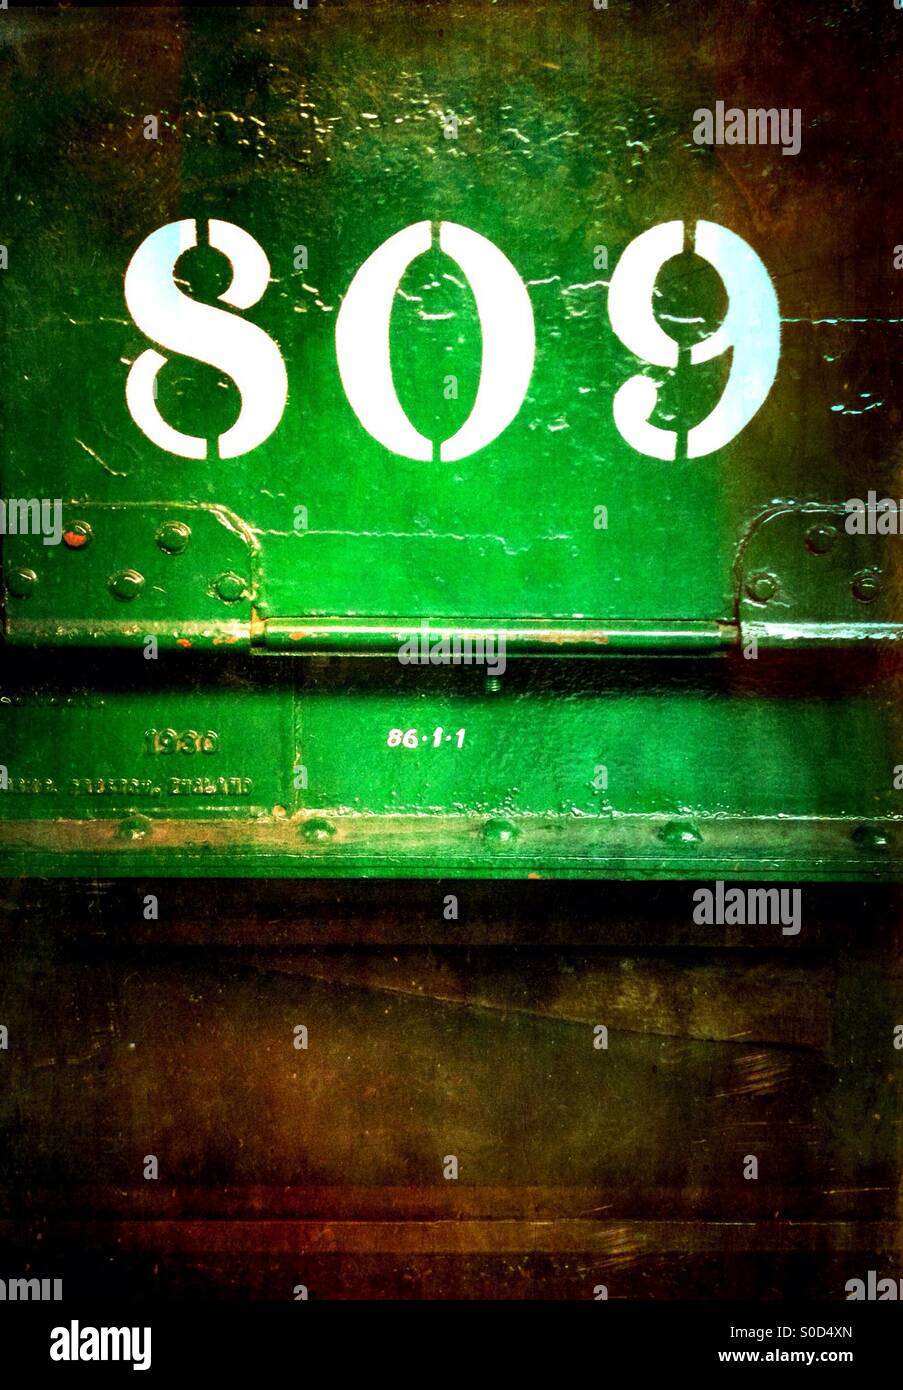 Green train carriage with the number '809' transferred on Stock Photo